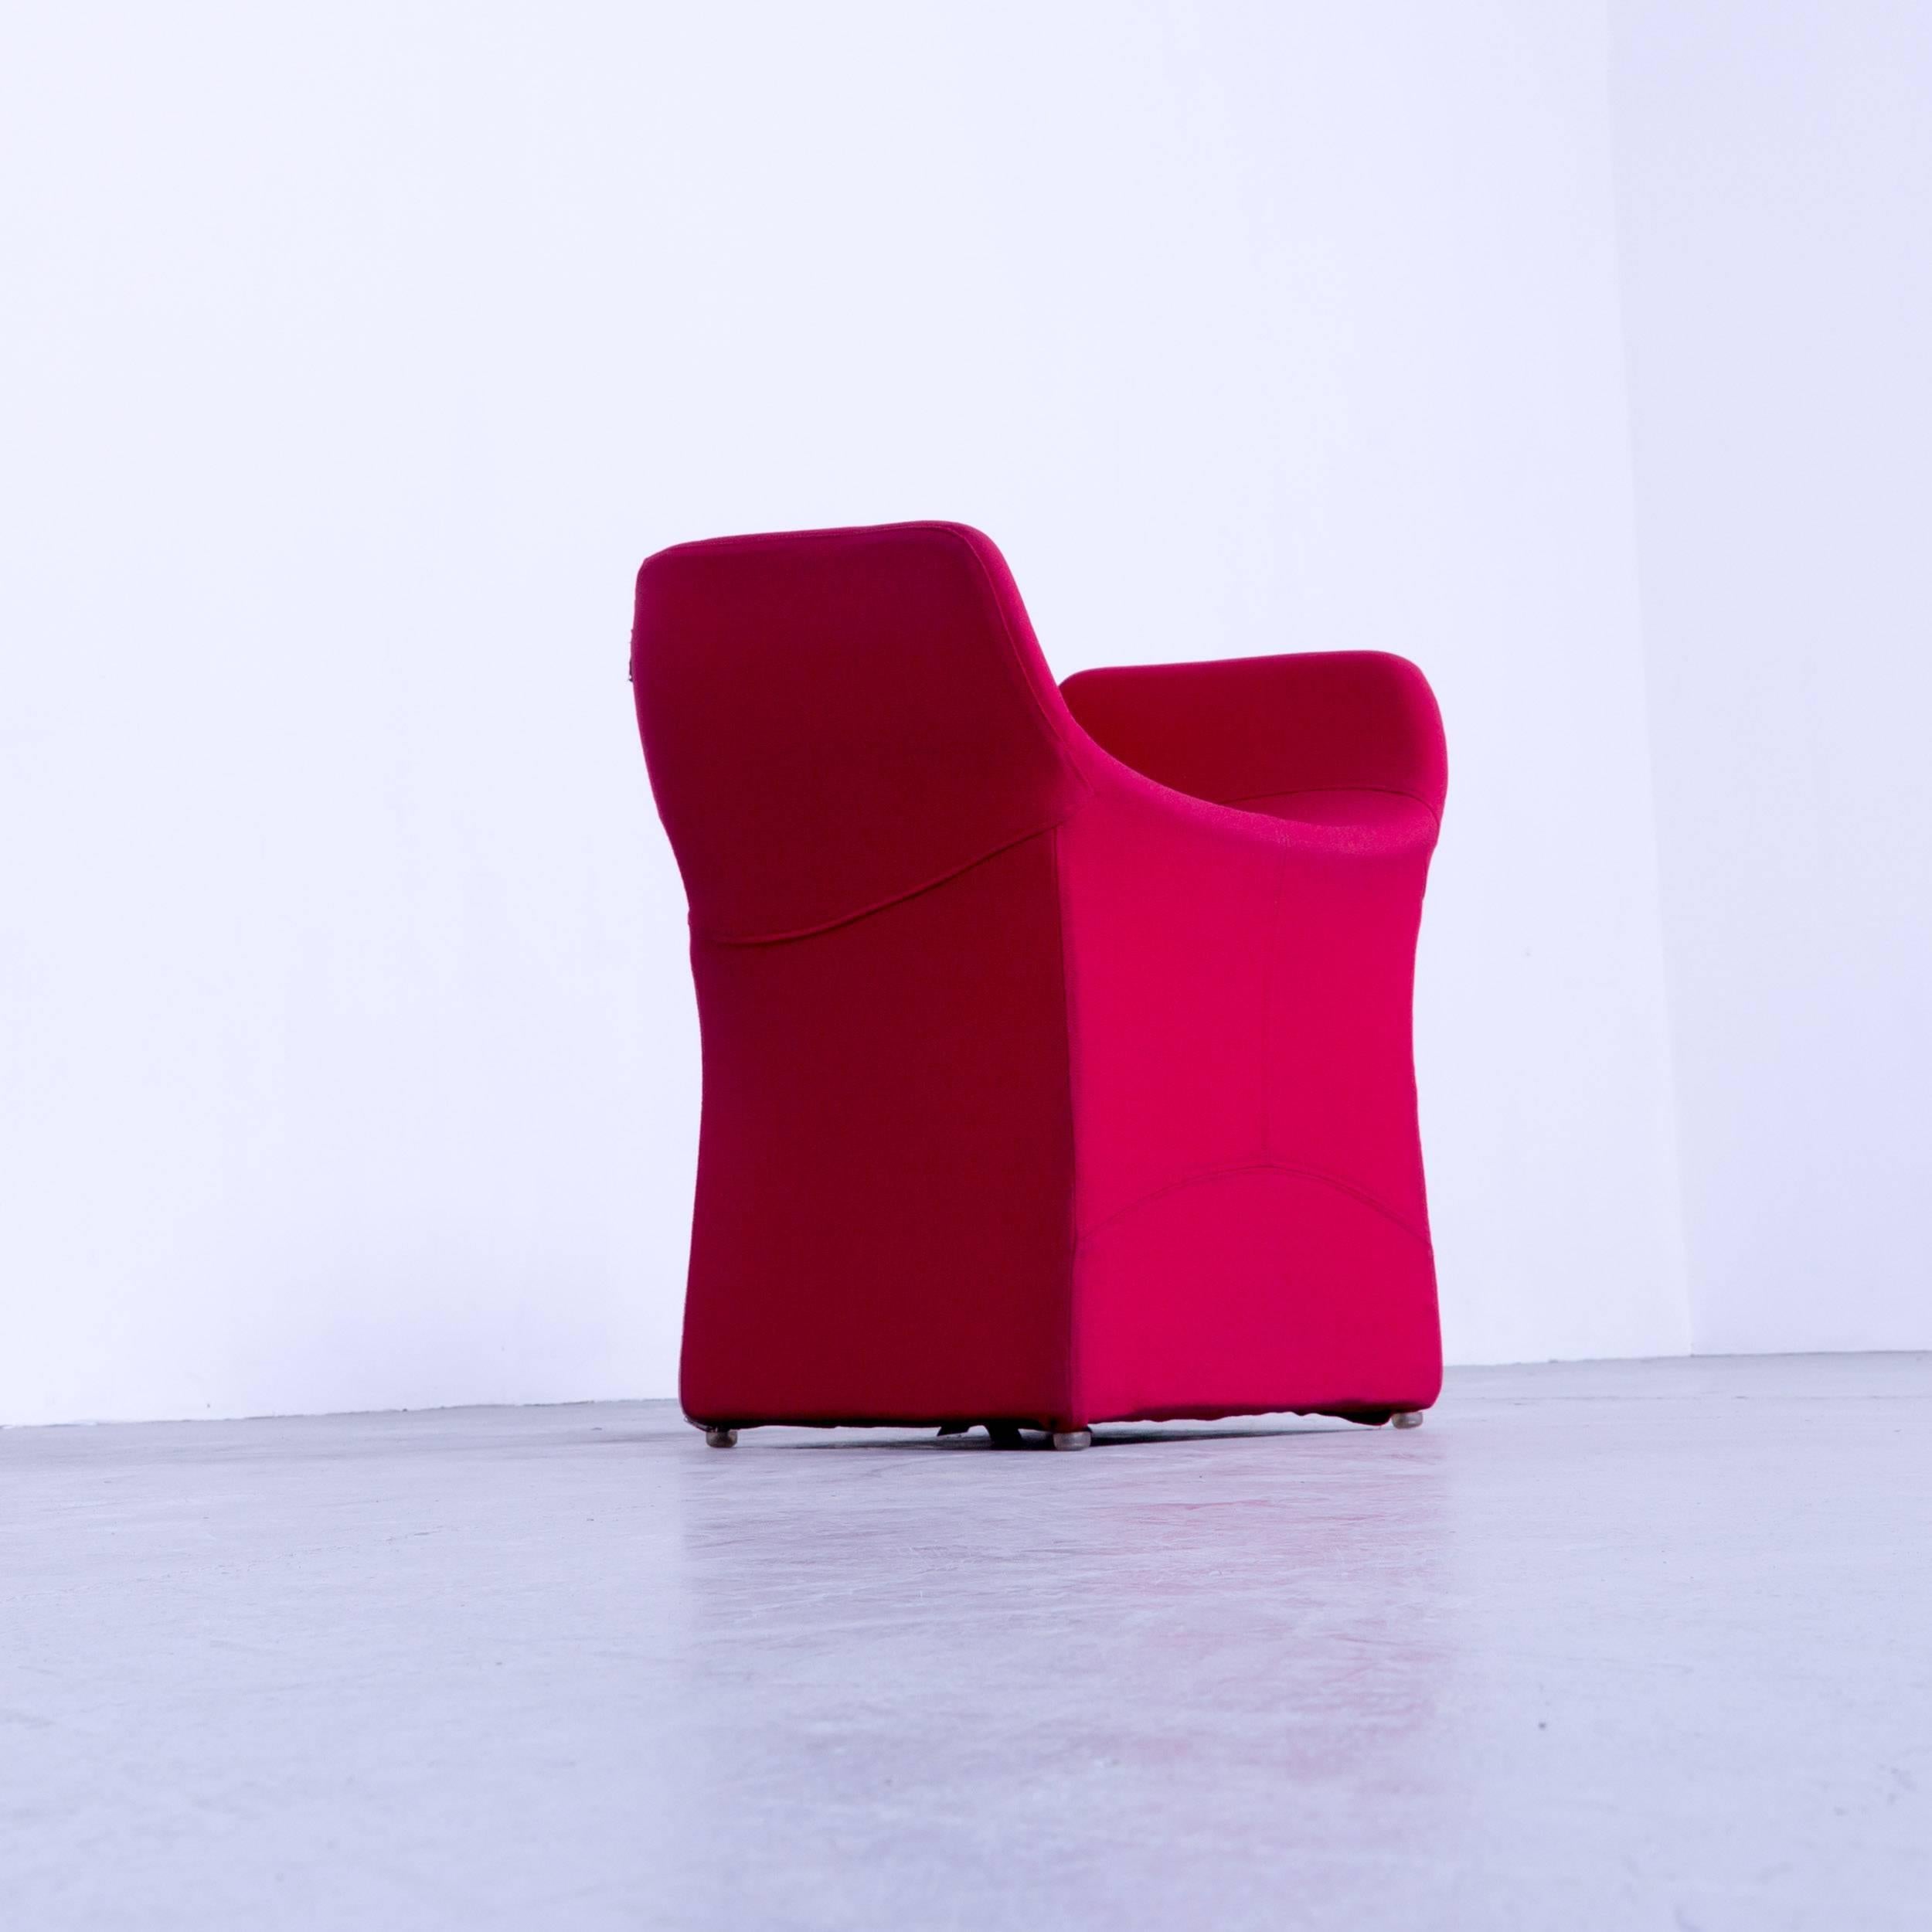 Leather Moroso Bloomy Designer Chair in High Quality Red Fabric by Patricia Urquiola